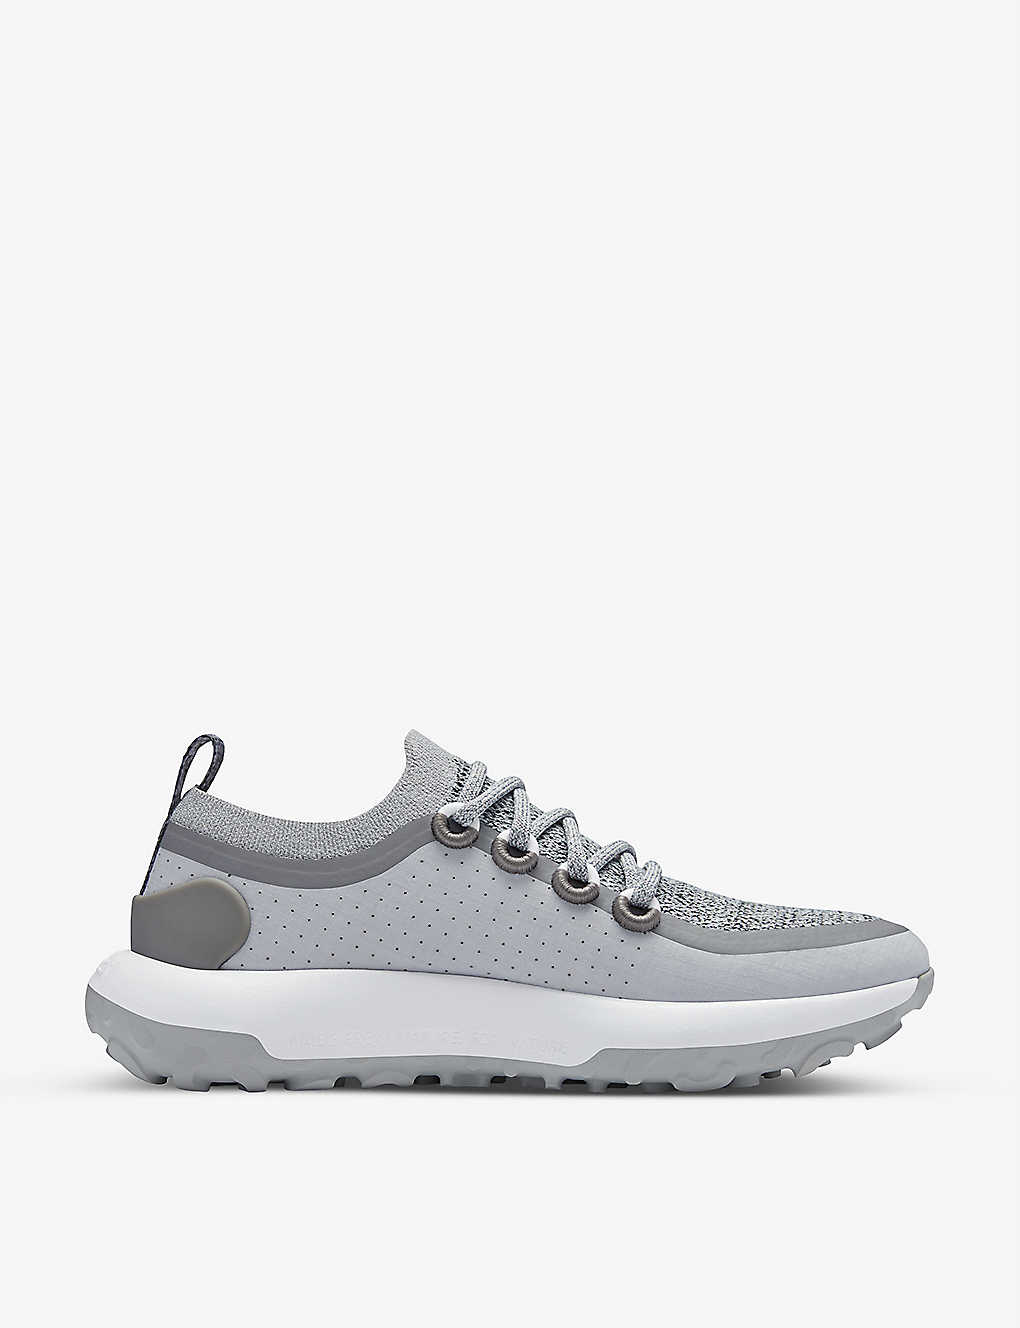 Allbirds Trail Runner Swt Low-top Woven Trainers In Medium Grey (grey)